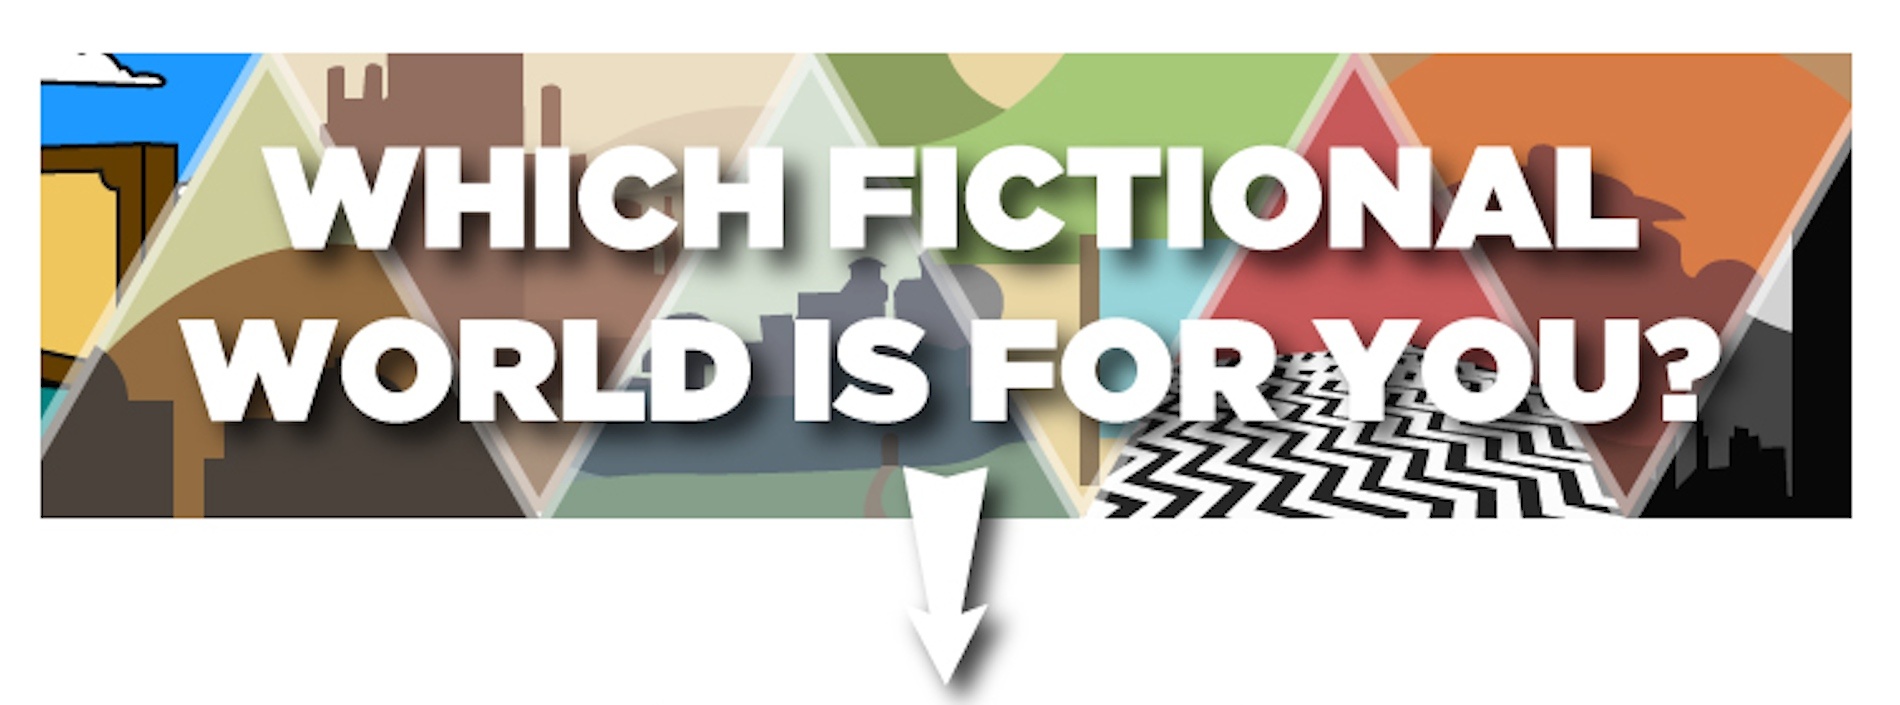 What Kind Of Fictional Character Are You? Find Out In Less Than 2 Minutes